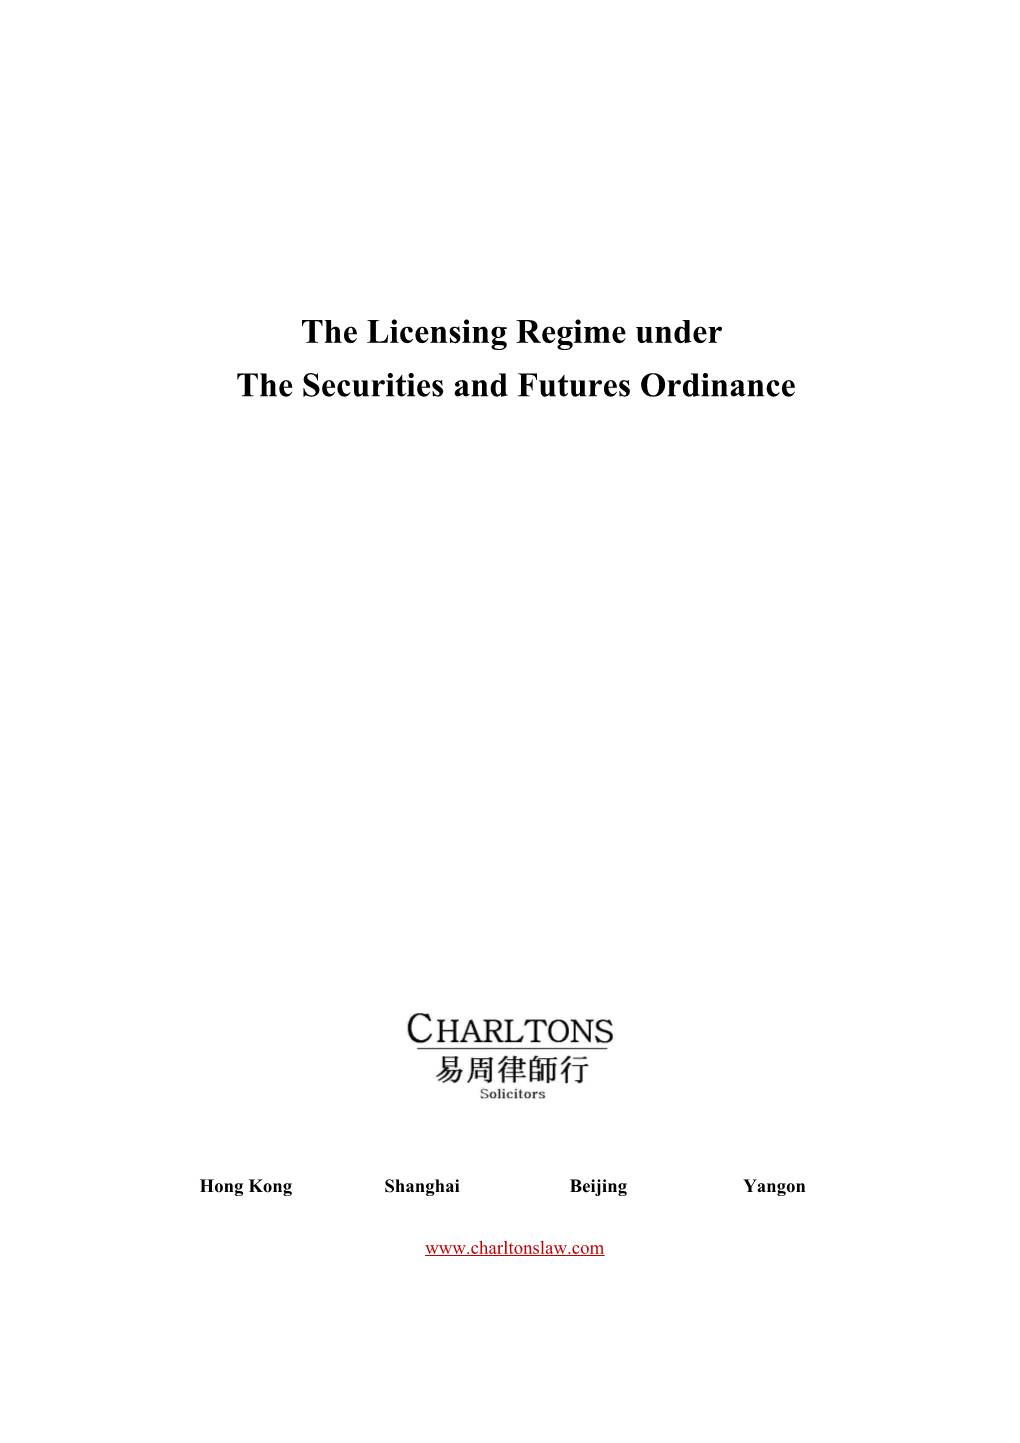 The New Licensing Regime Under the Securities and Futures Ordinance